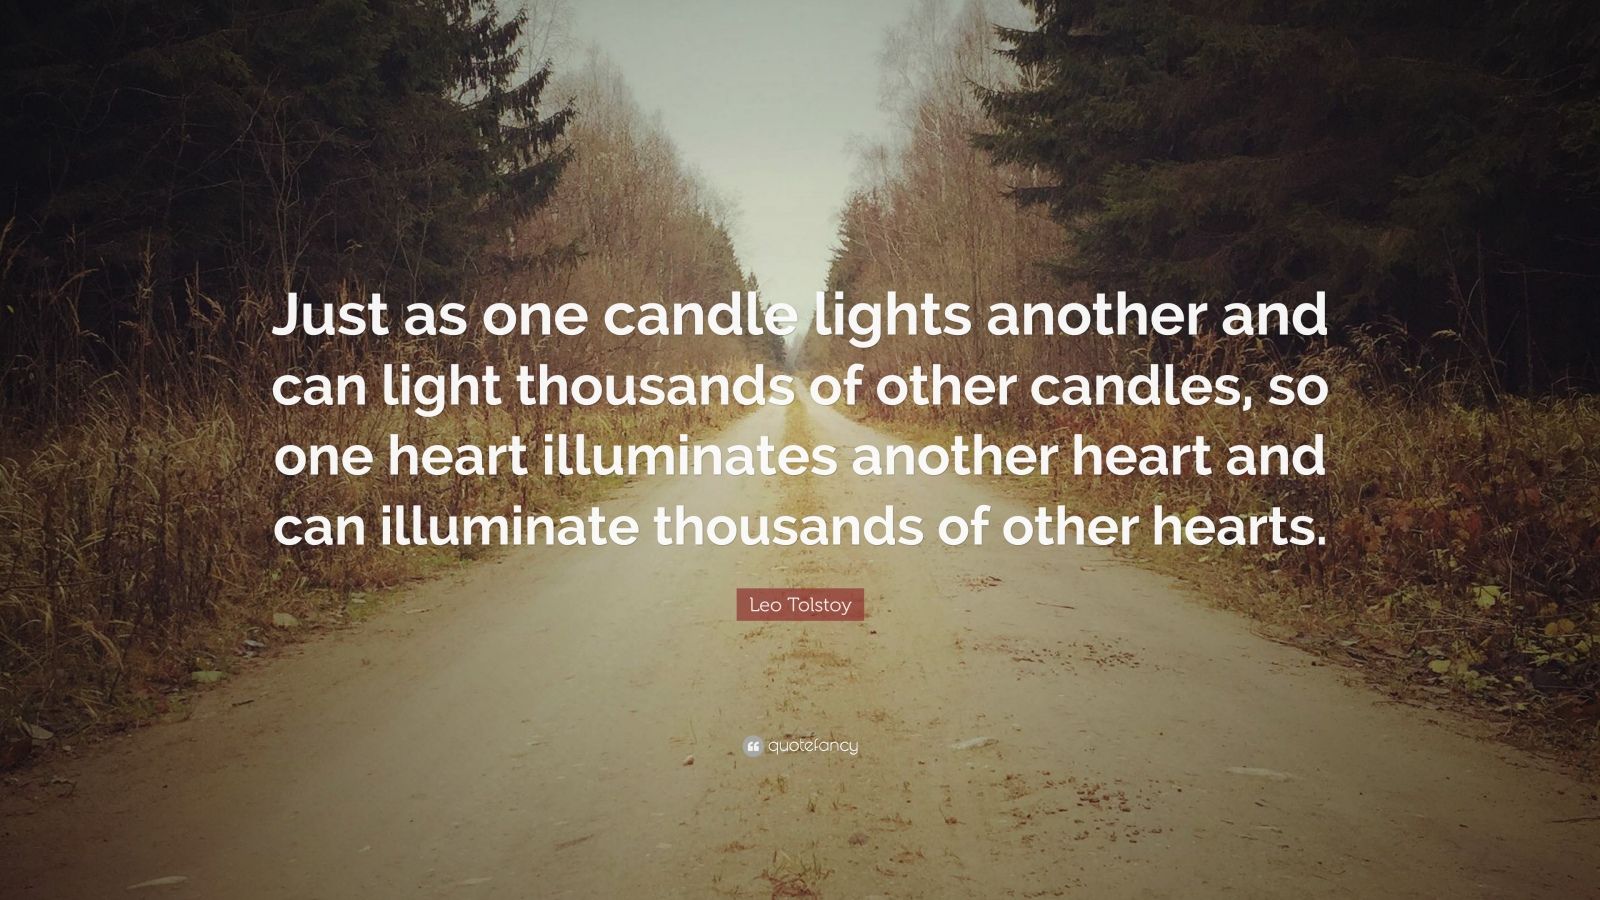 Leo Tolstoy Quote: “Just as one candle lights another and can light